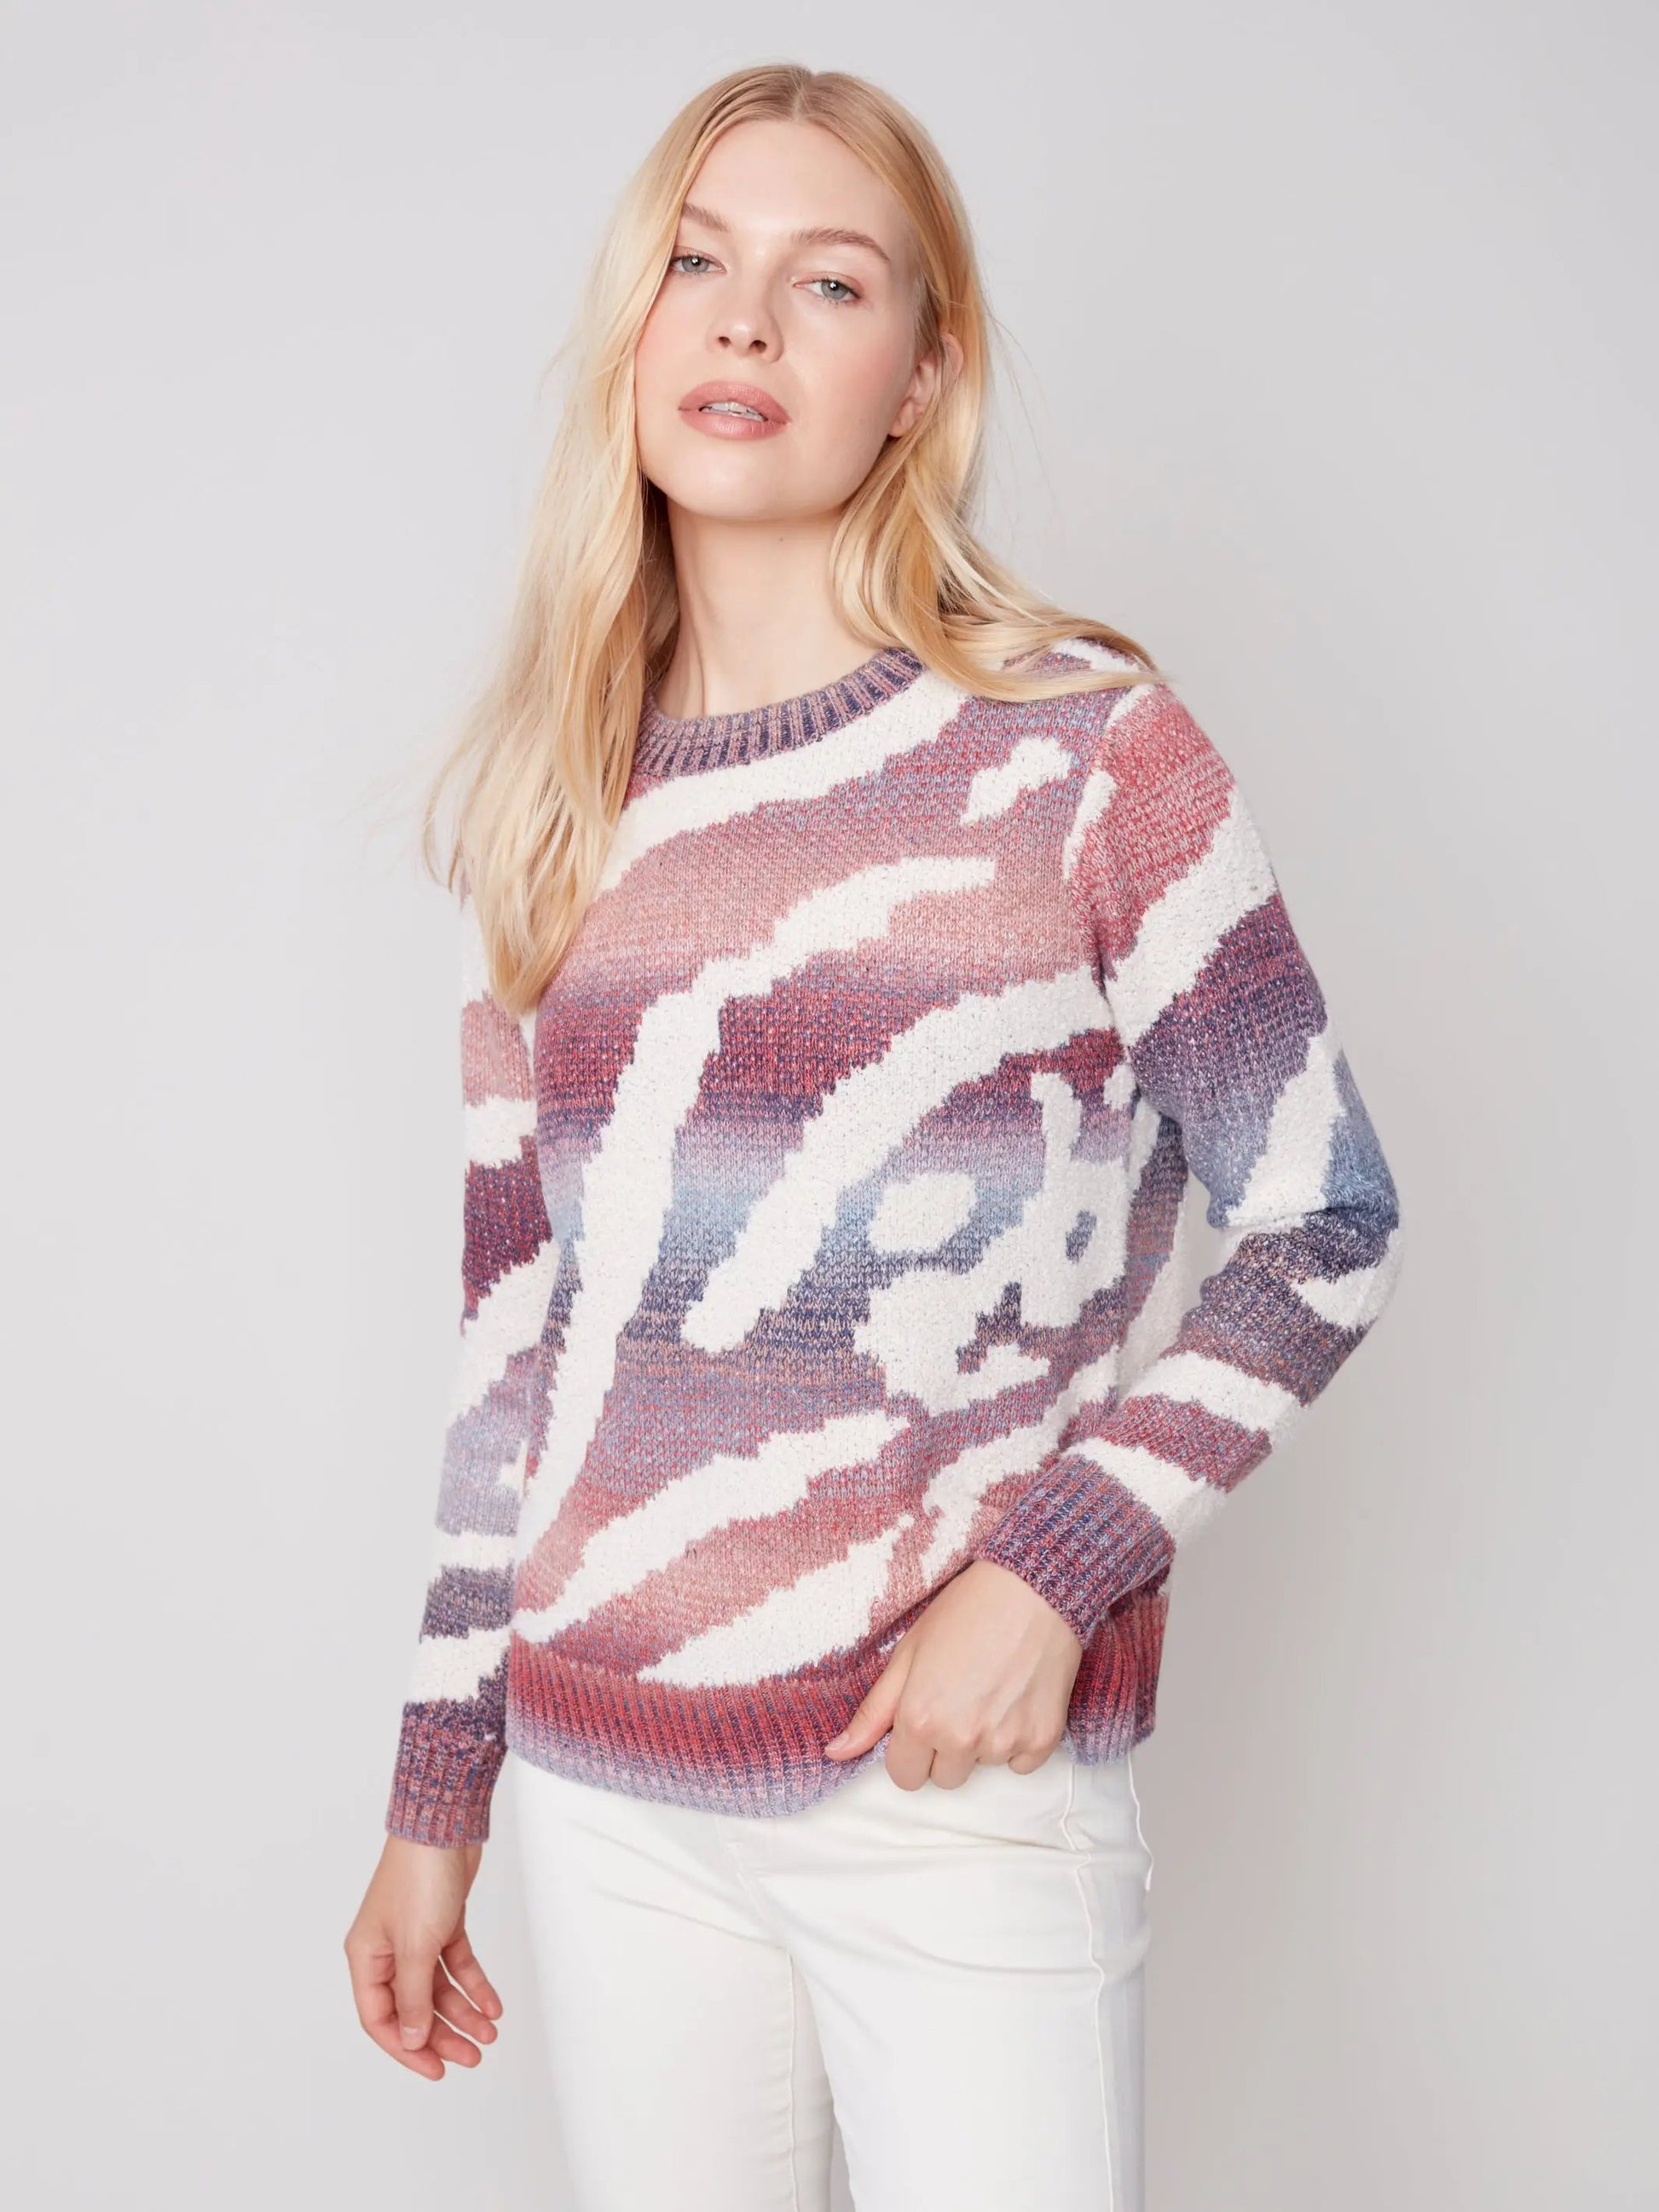 A woman wearing a Charlie B Ruby Crew Neck Sweater.